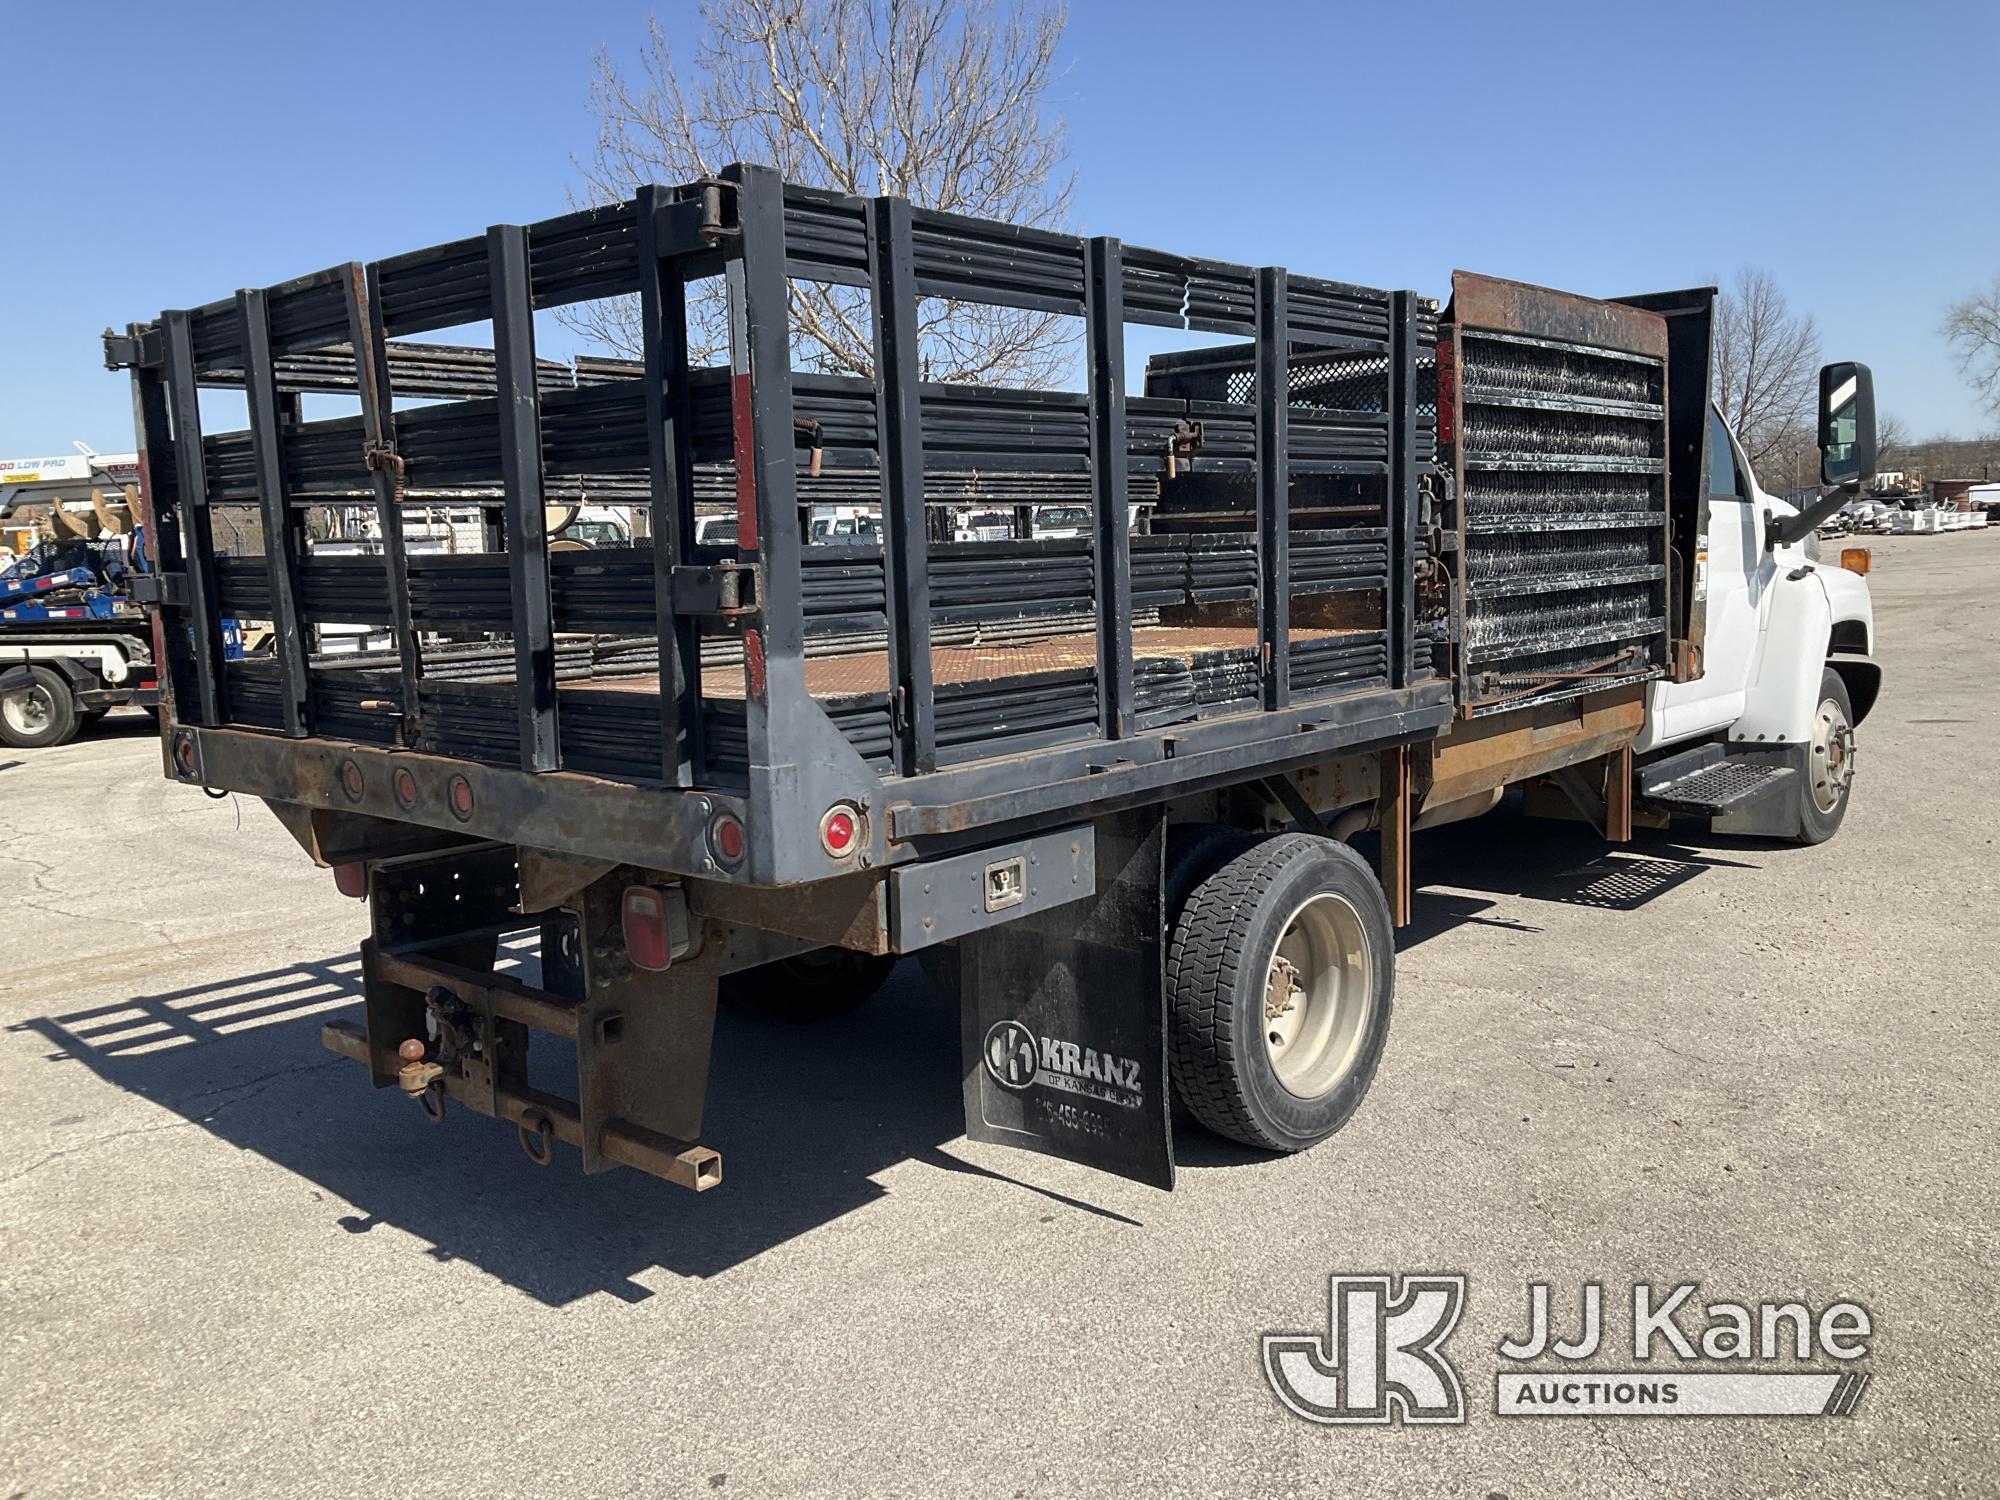 (Kansas City, MO) 2003 GMC C5500 Flatbed Truck Runs & Moves) (Will not exceed 40mph, Bad Speedometer